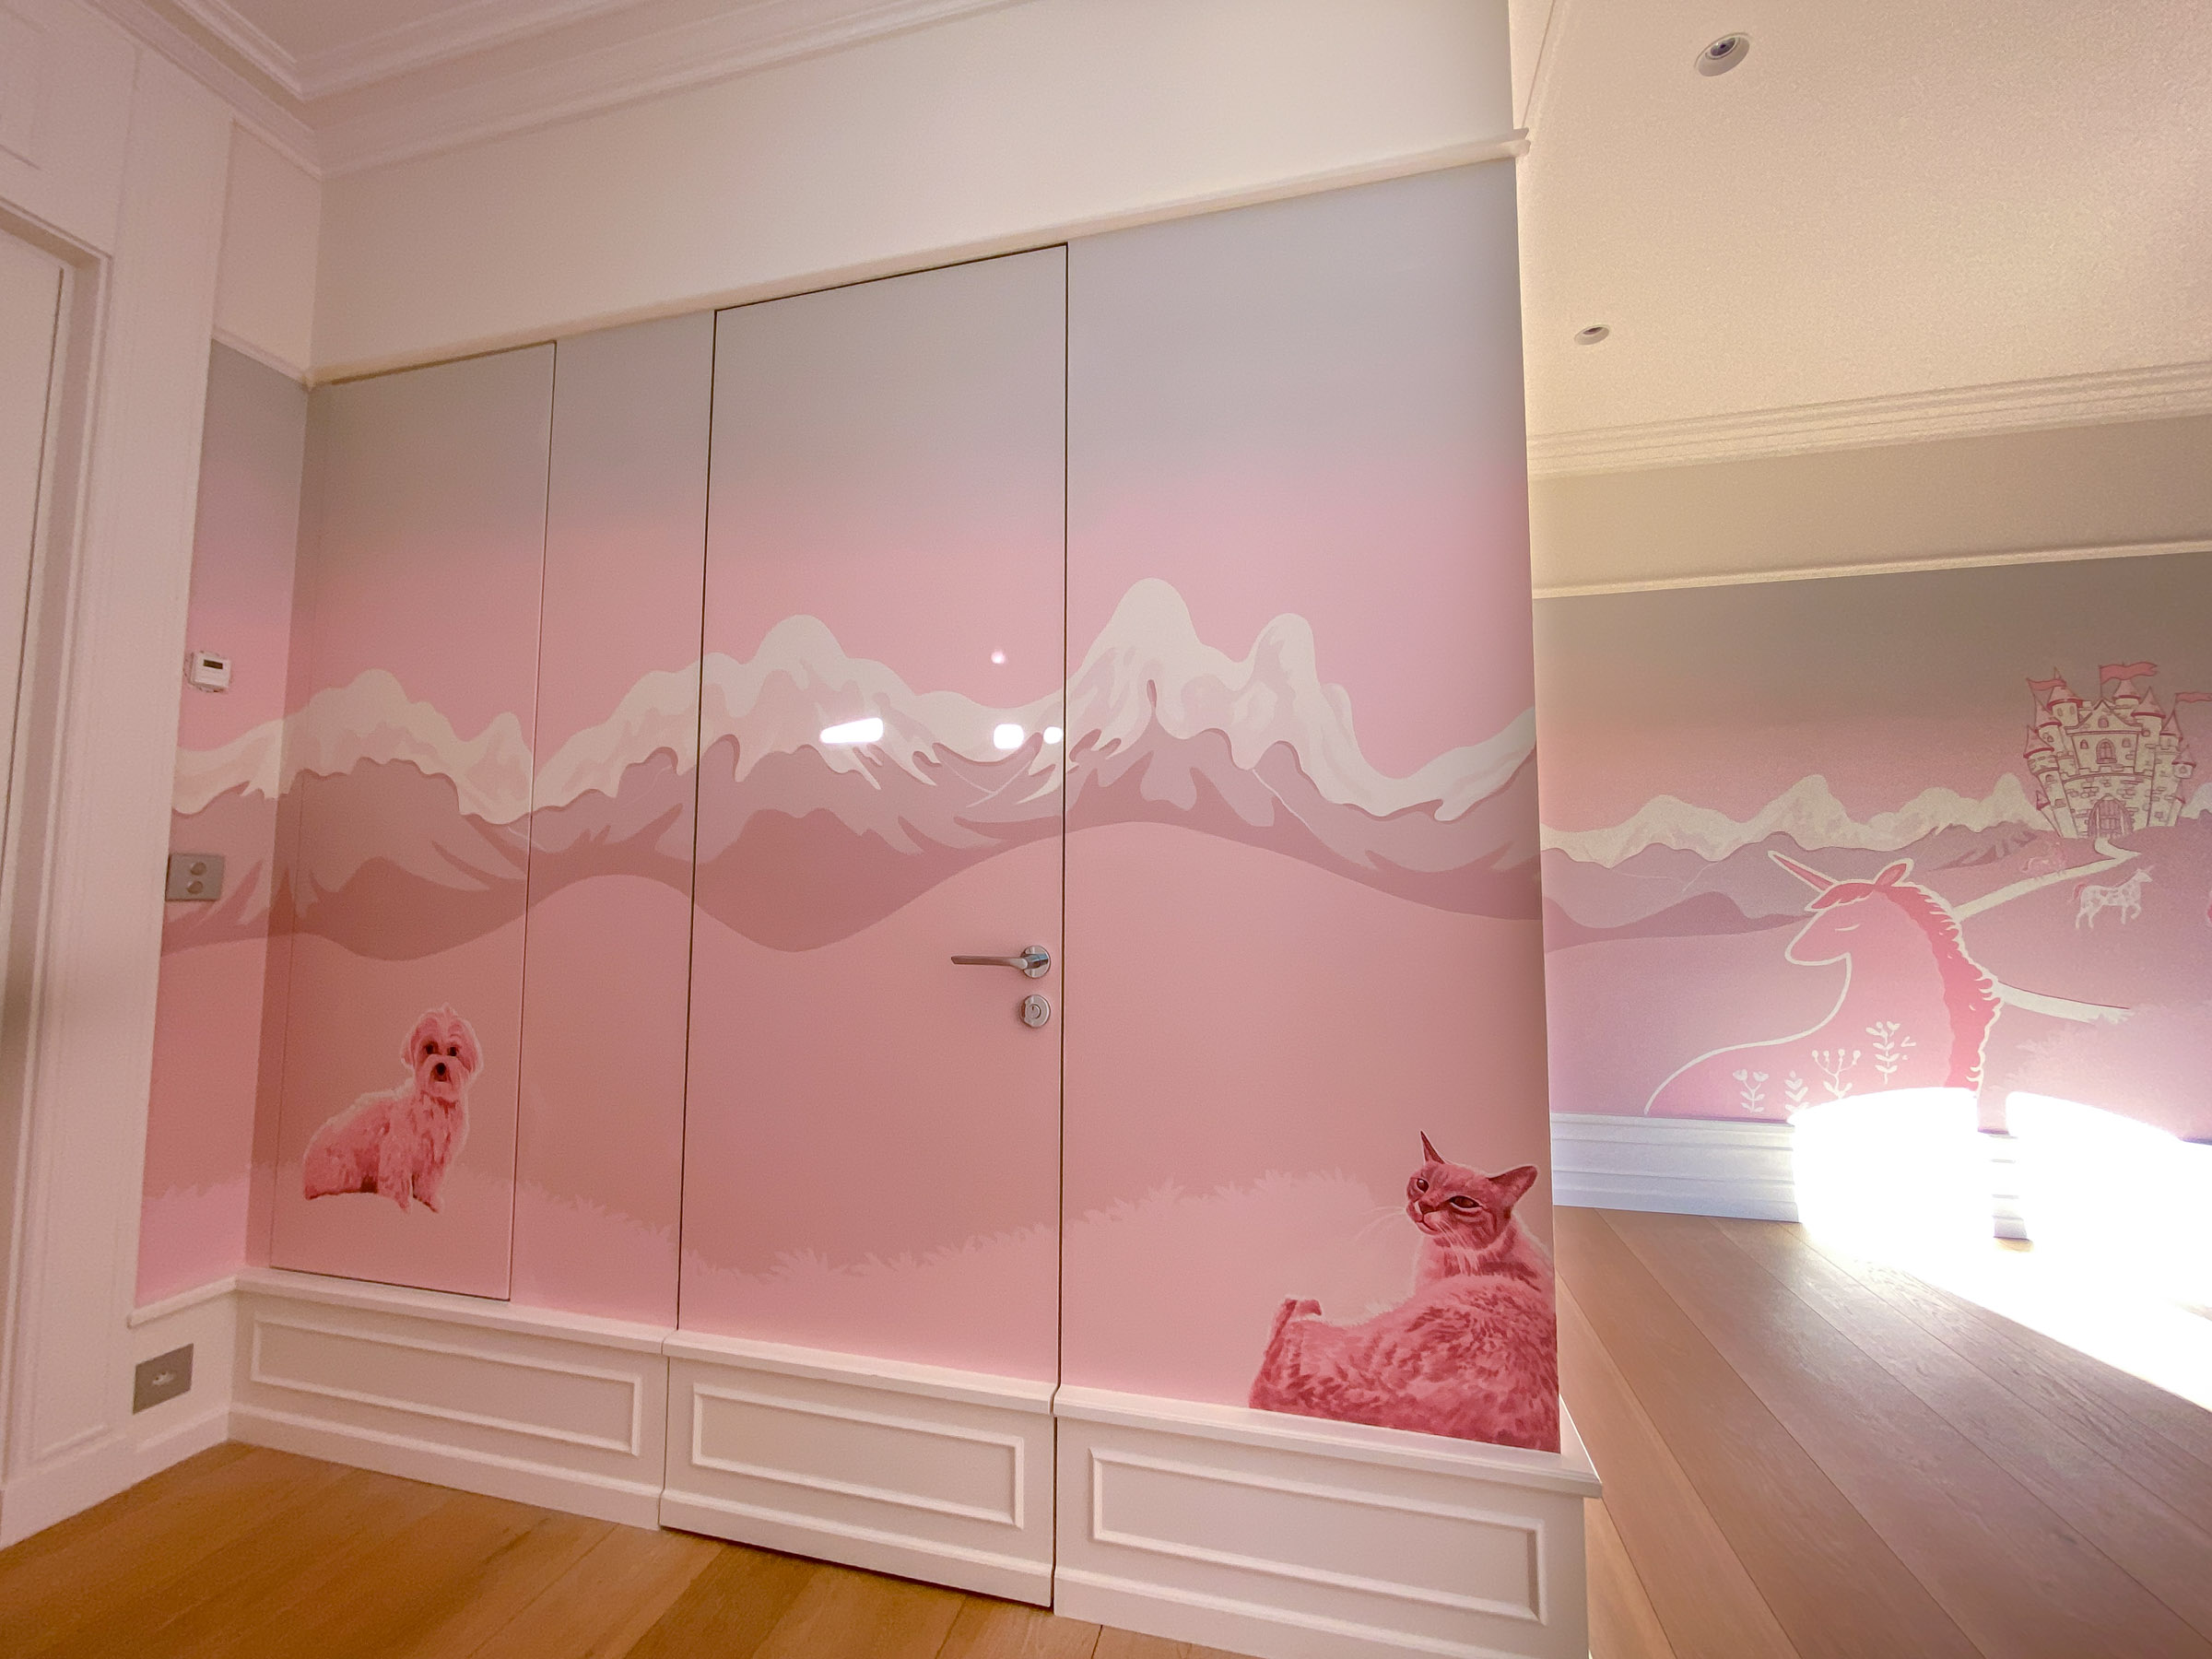 Bedroom mural for client's daughter, showing layered mountain scene and two more of their pets. Door hides the en-suite bathroom